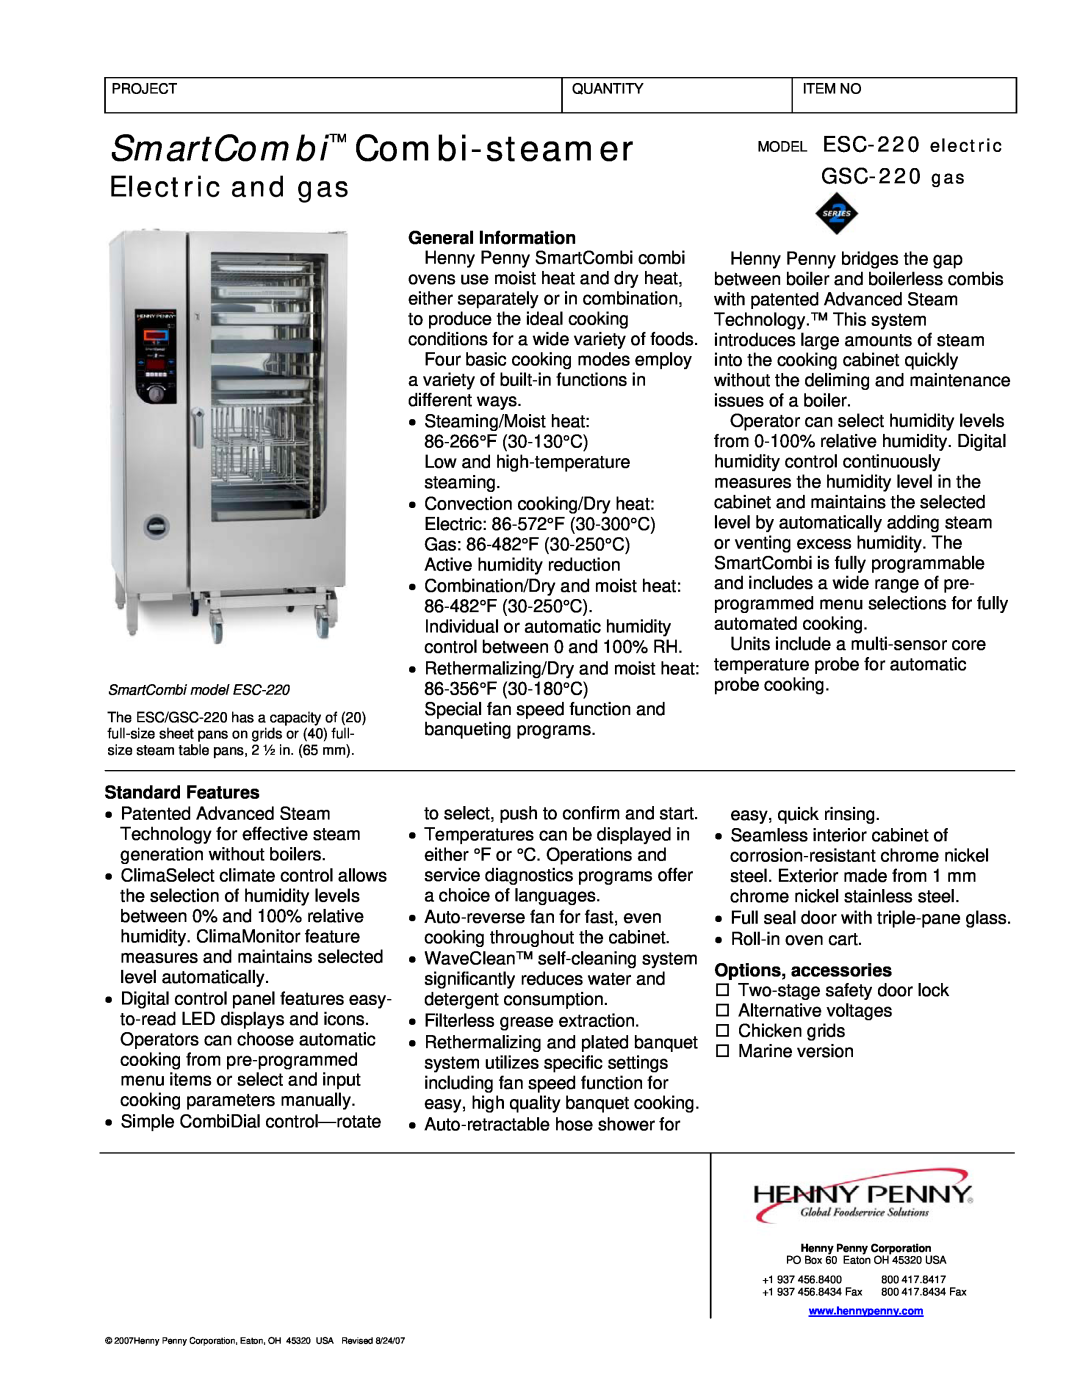 Henny Penny manual MODEL ESC-220 electric, GSC-220 gas, SmartCombi Combi-steamer, Electric and gas, General Information 